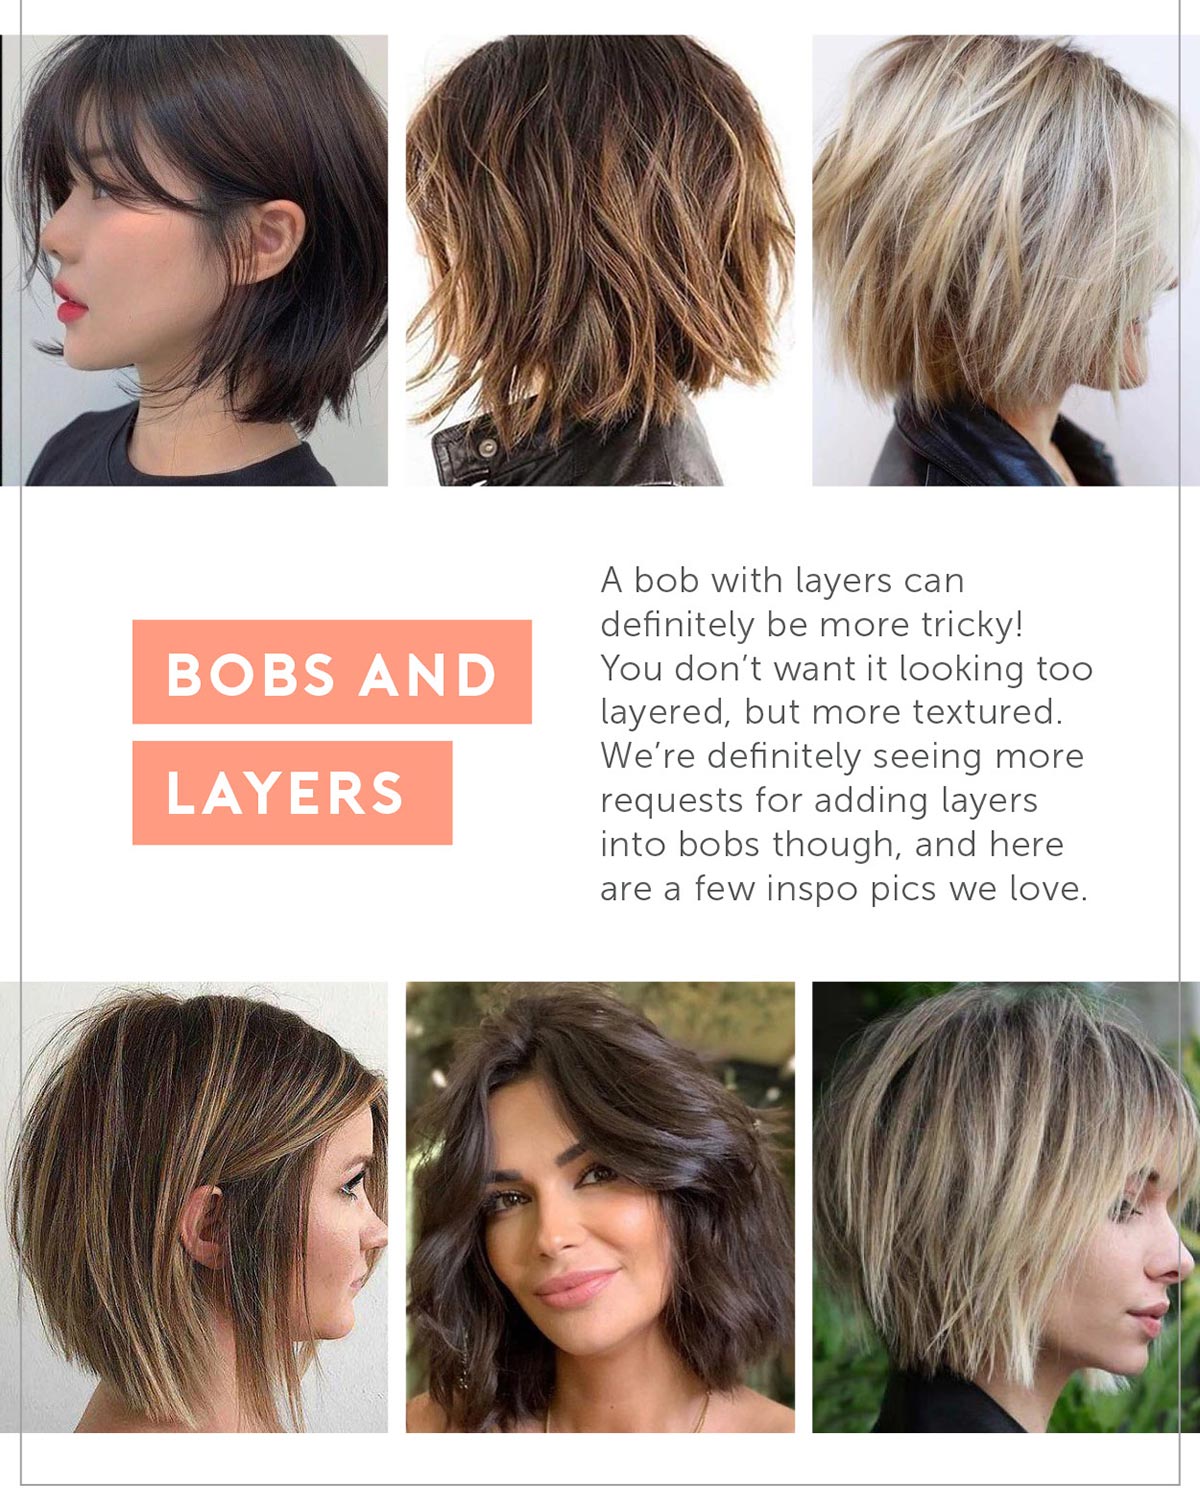 3. Bobs and Layers A bob with layers can definitely be more tricky! You don’t want it looking too layered, but more textured- we're definitely seeing more requests for adding layers into bobs though- and here are a few inspo pics we love.